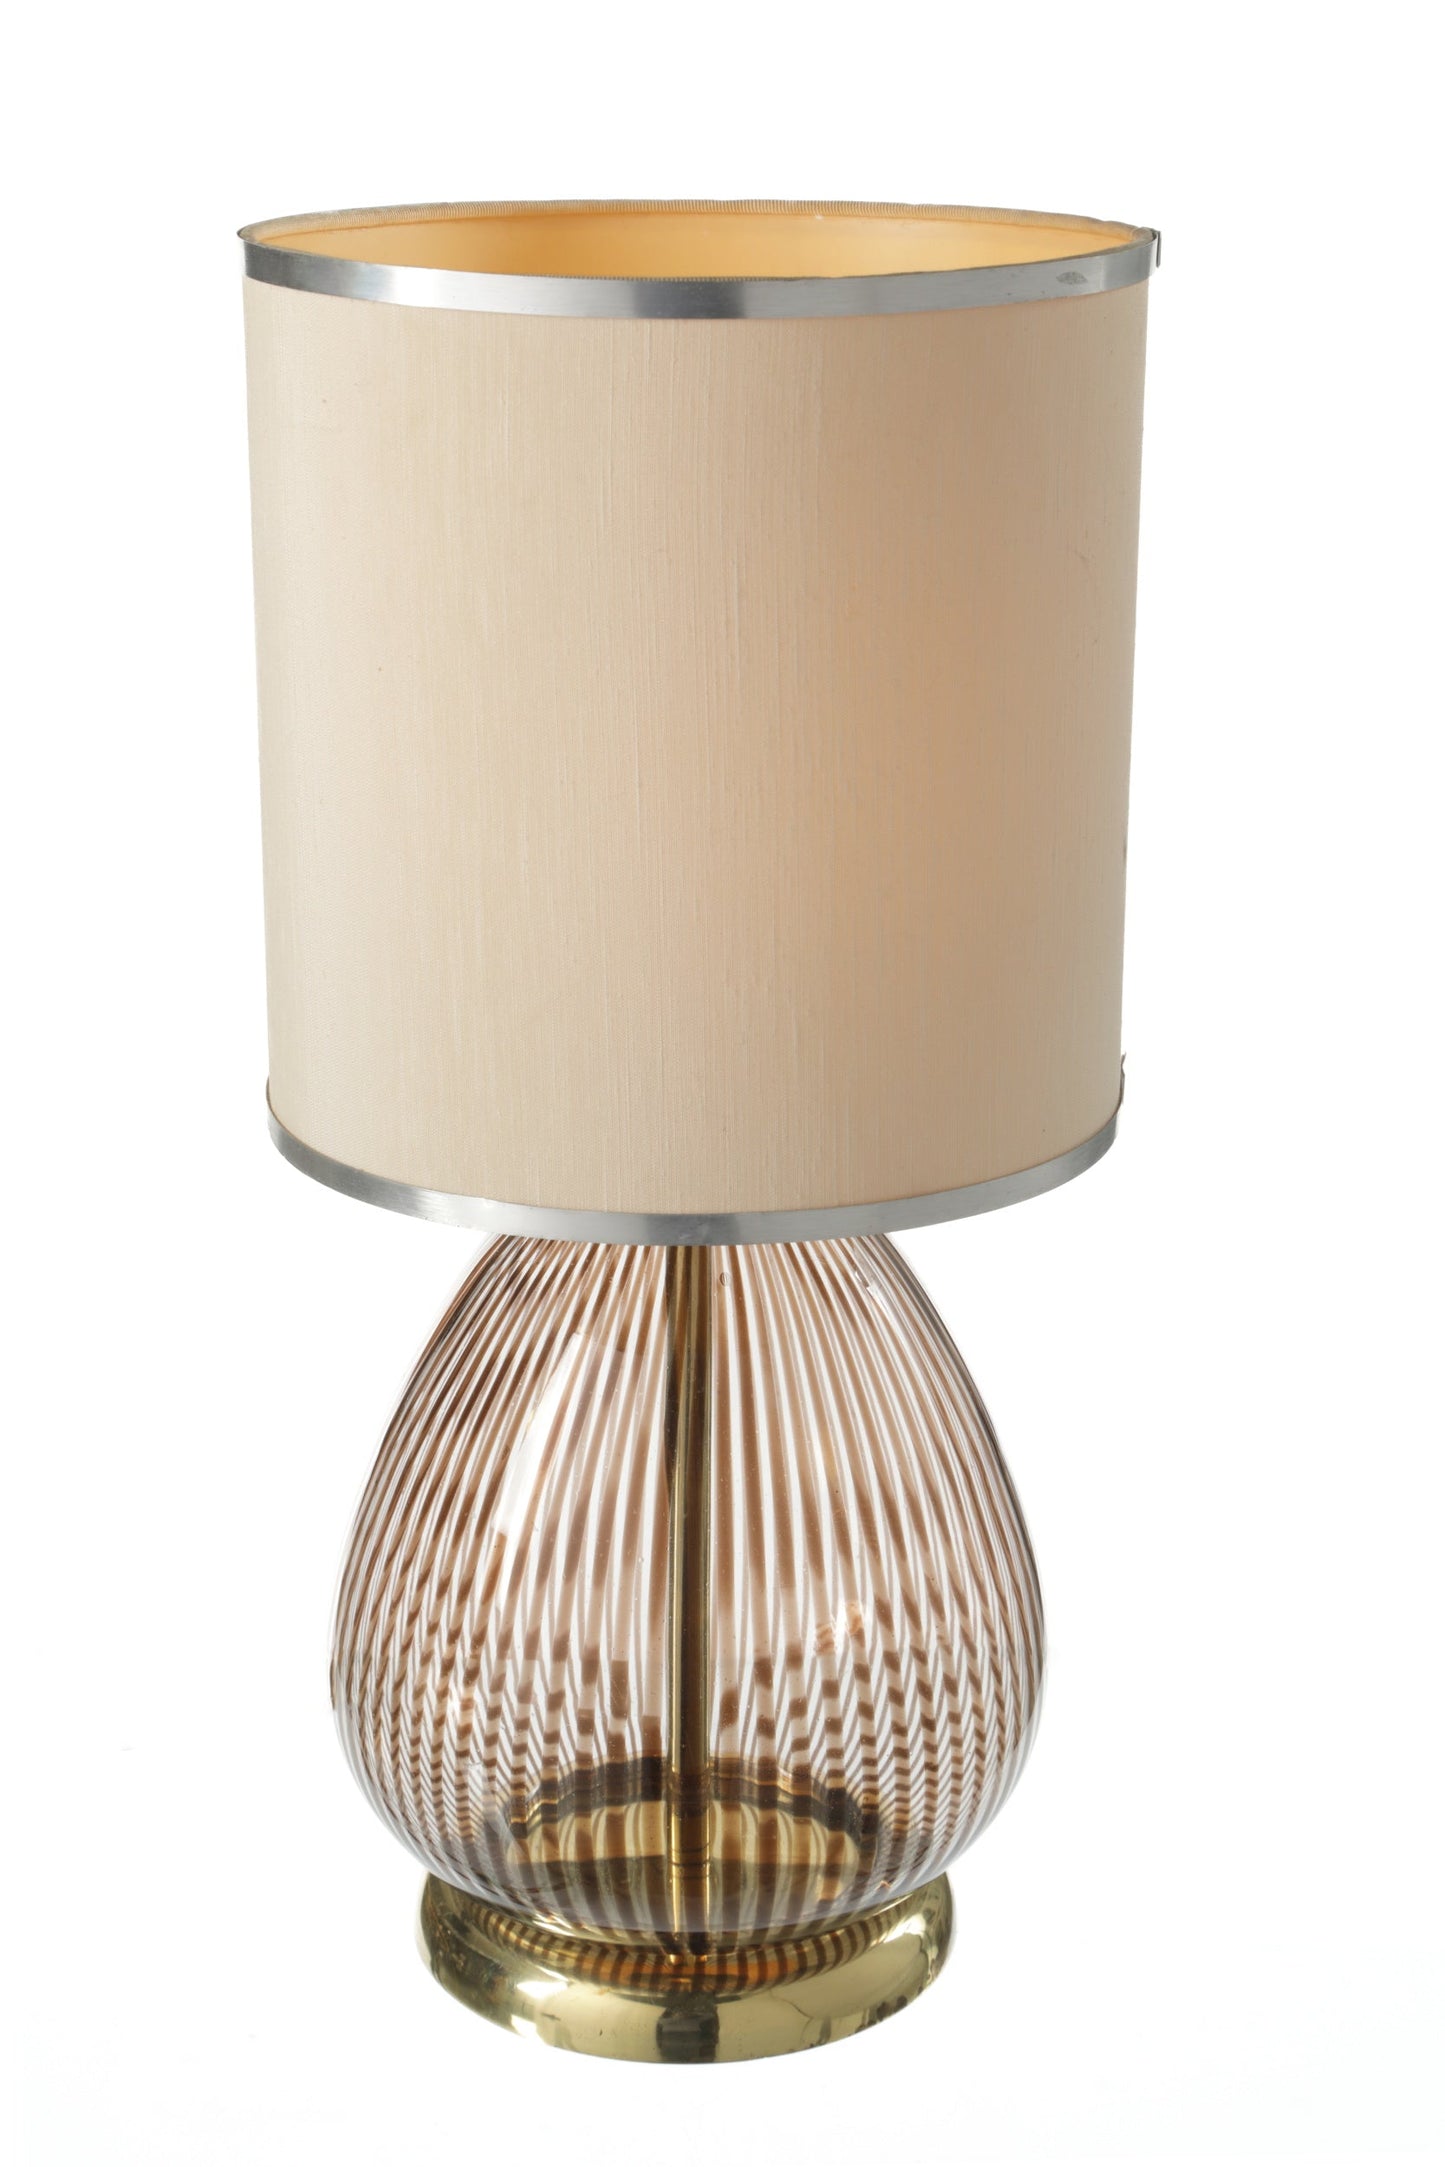 70s Veart table lamp